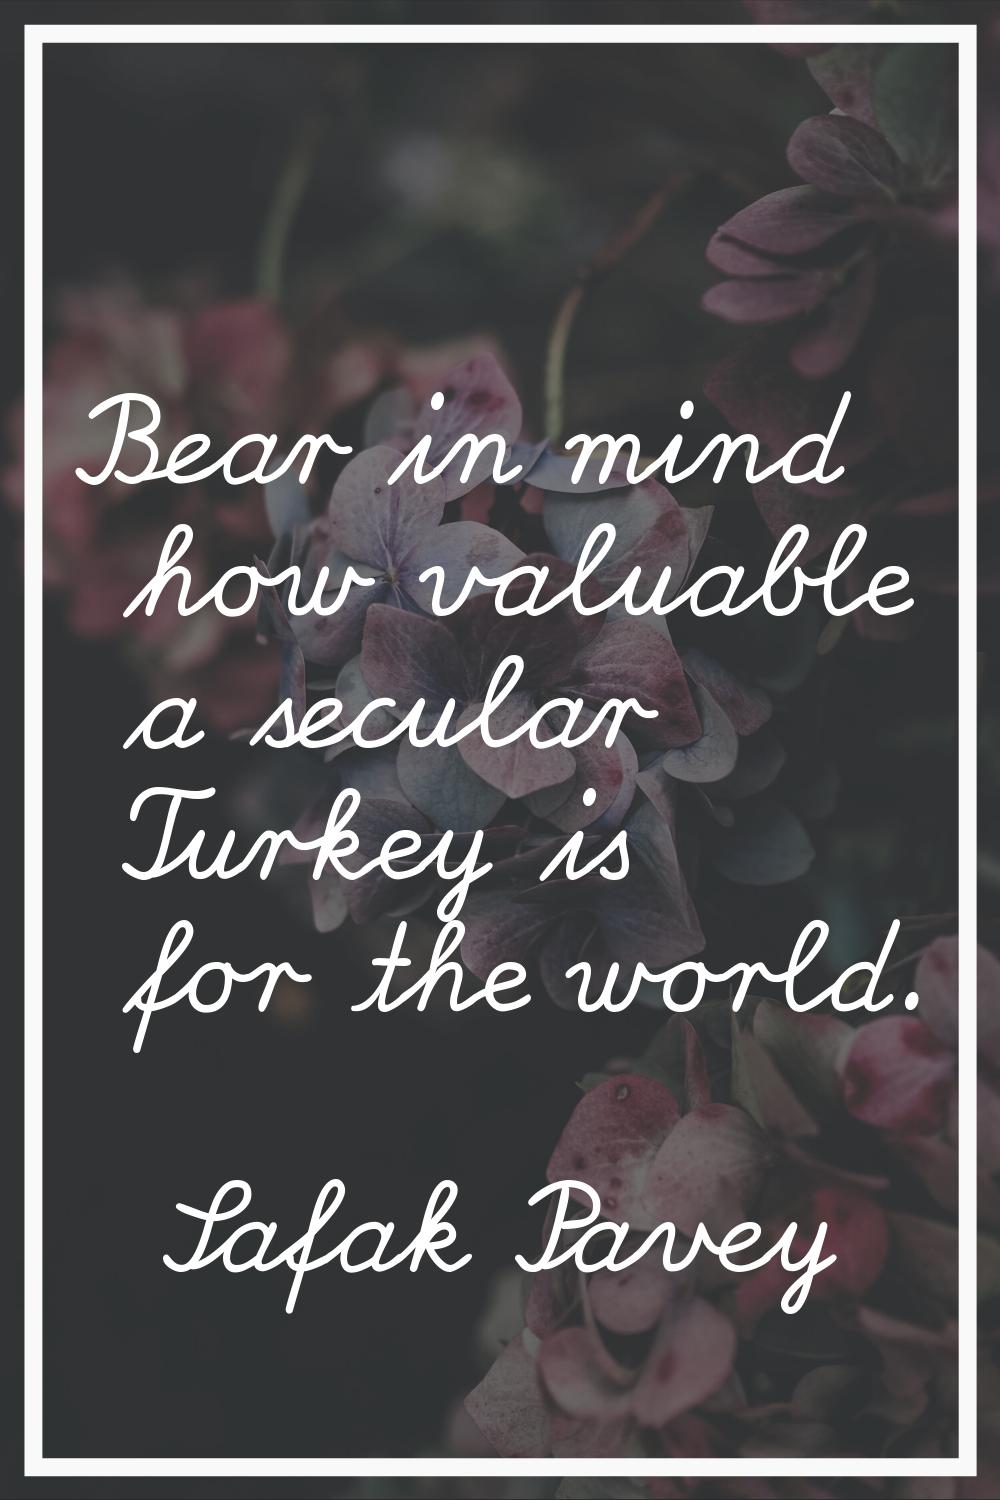 Bear in mind how valuable a secular Turkey is for the world.